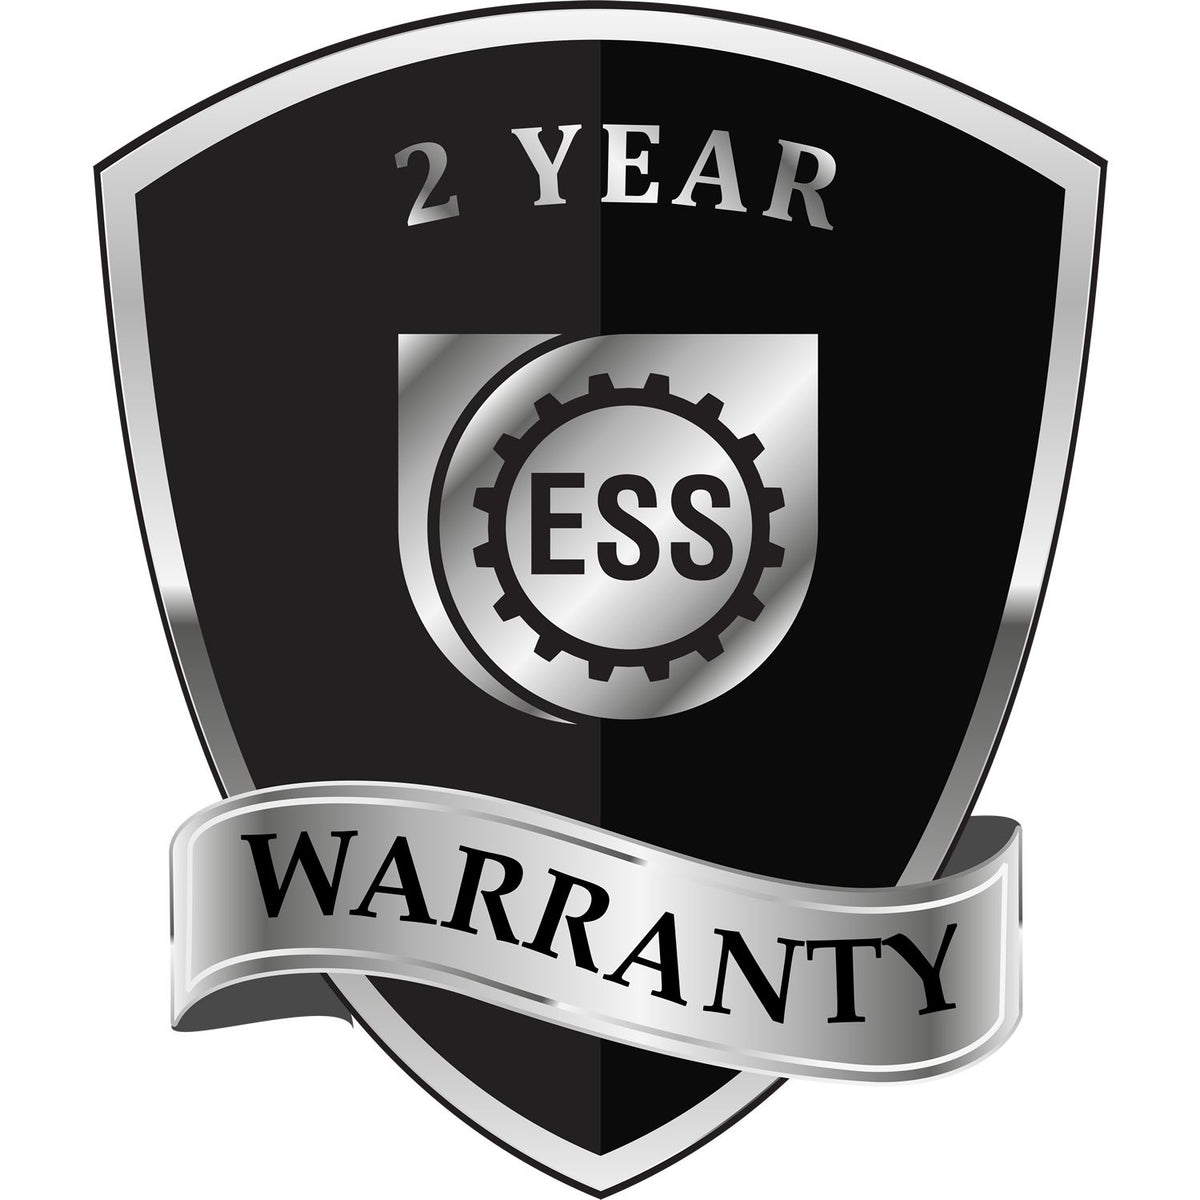 A badge or emblem showing a warranty icon for the Heavy Duty Cast Iron Illinois Architect Embosser